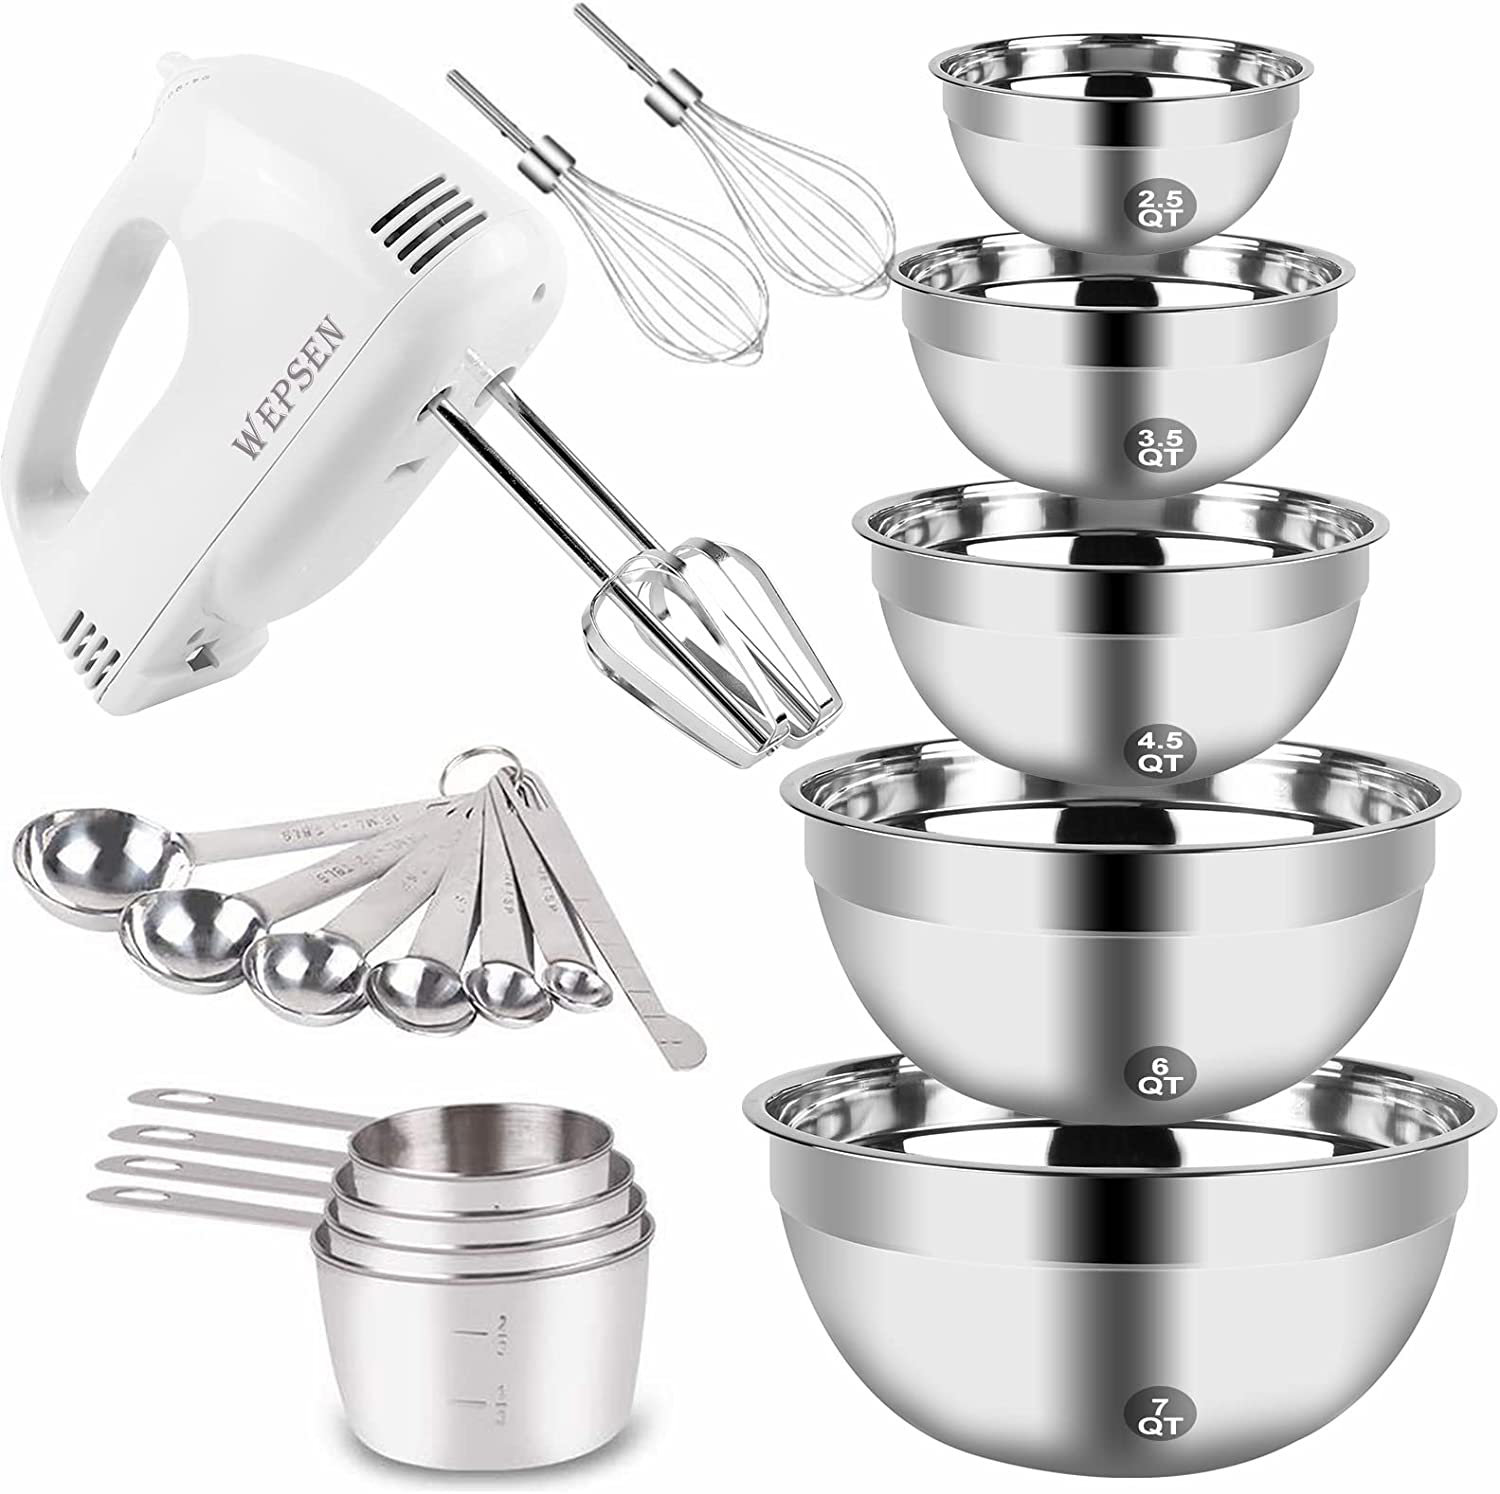 Measuring Cups Set, 5pcs Stainless Steel Nesting Measuring Cups Kitchen Measuring  Cups For Cooking Baking Dry And Liquid Ingredients Dishwasher Safe